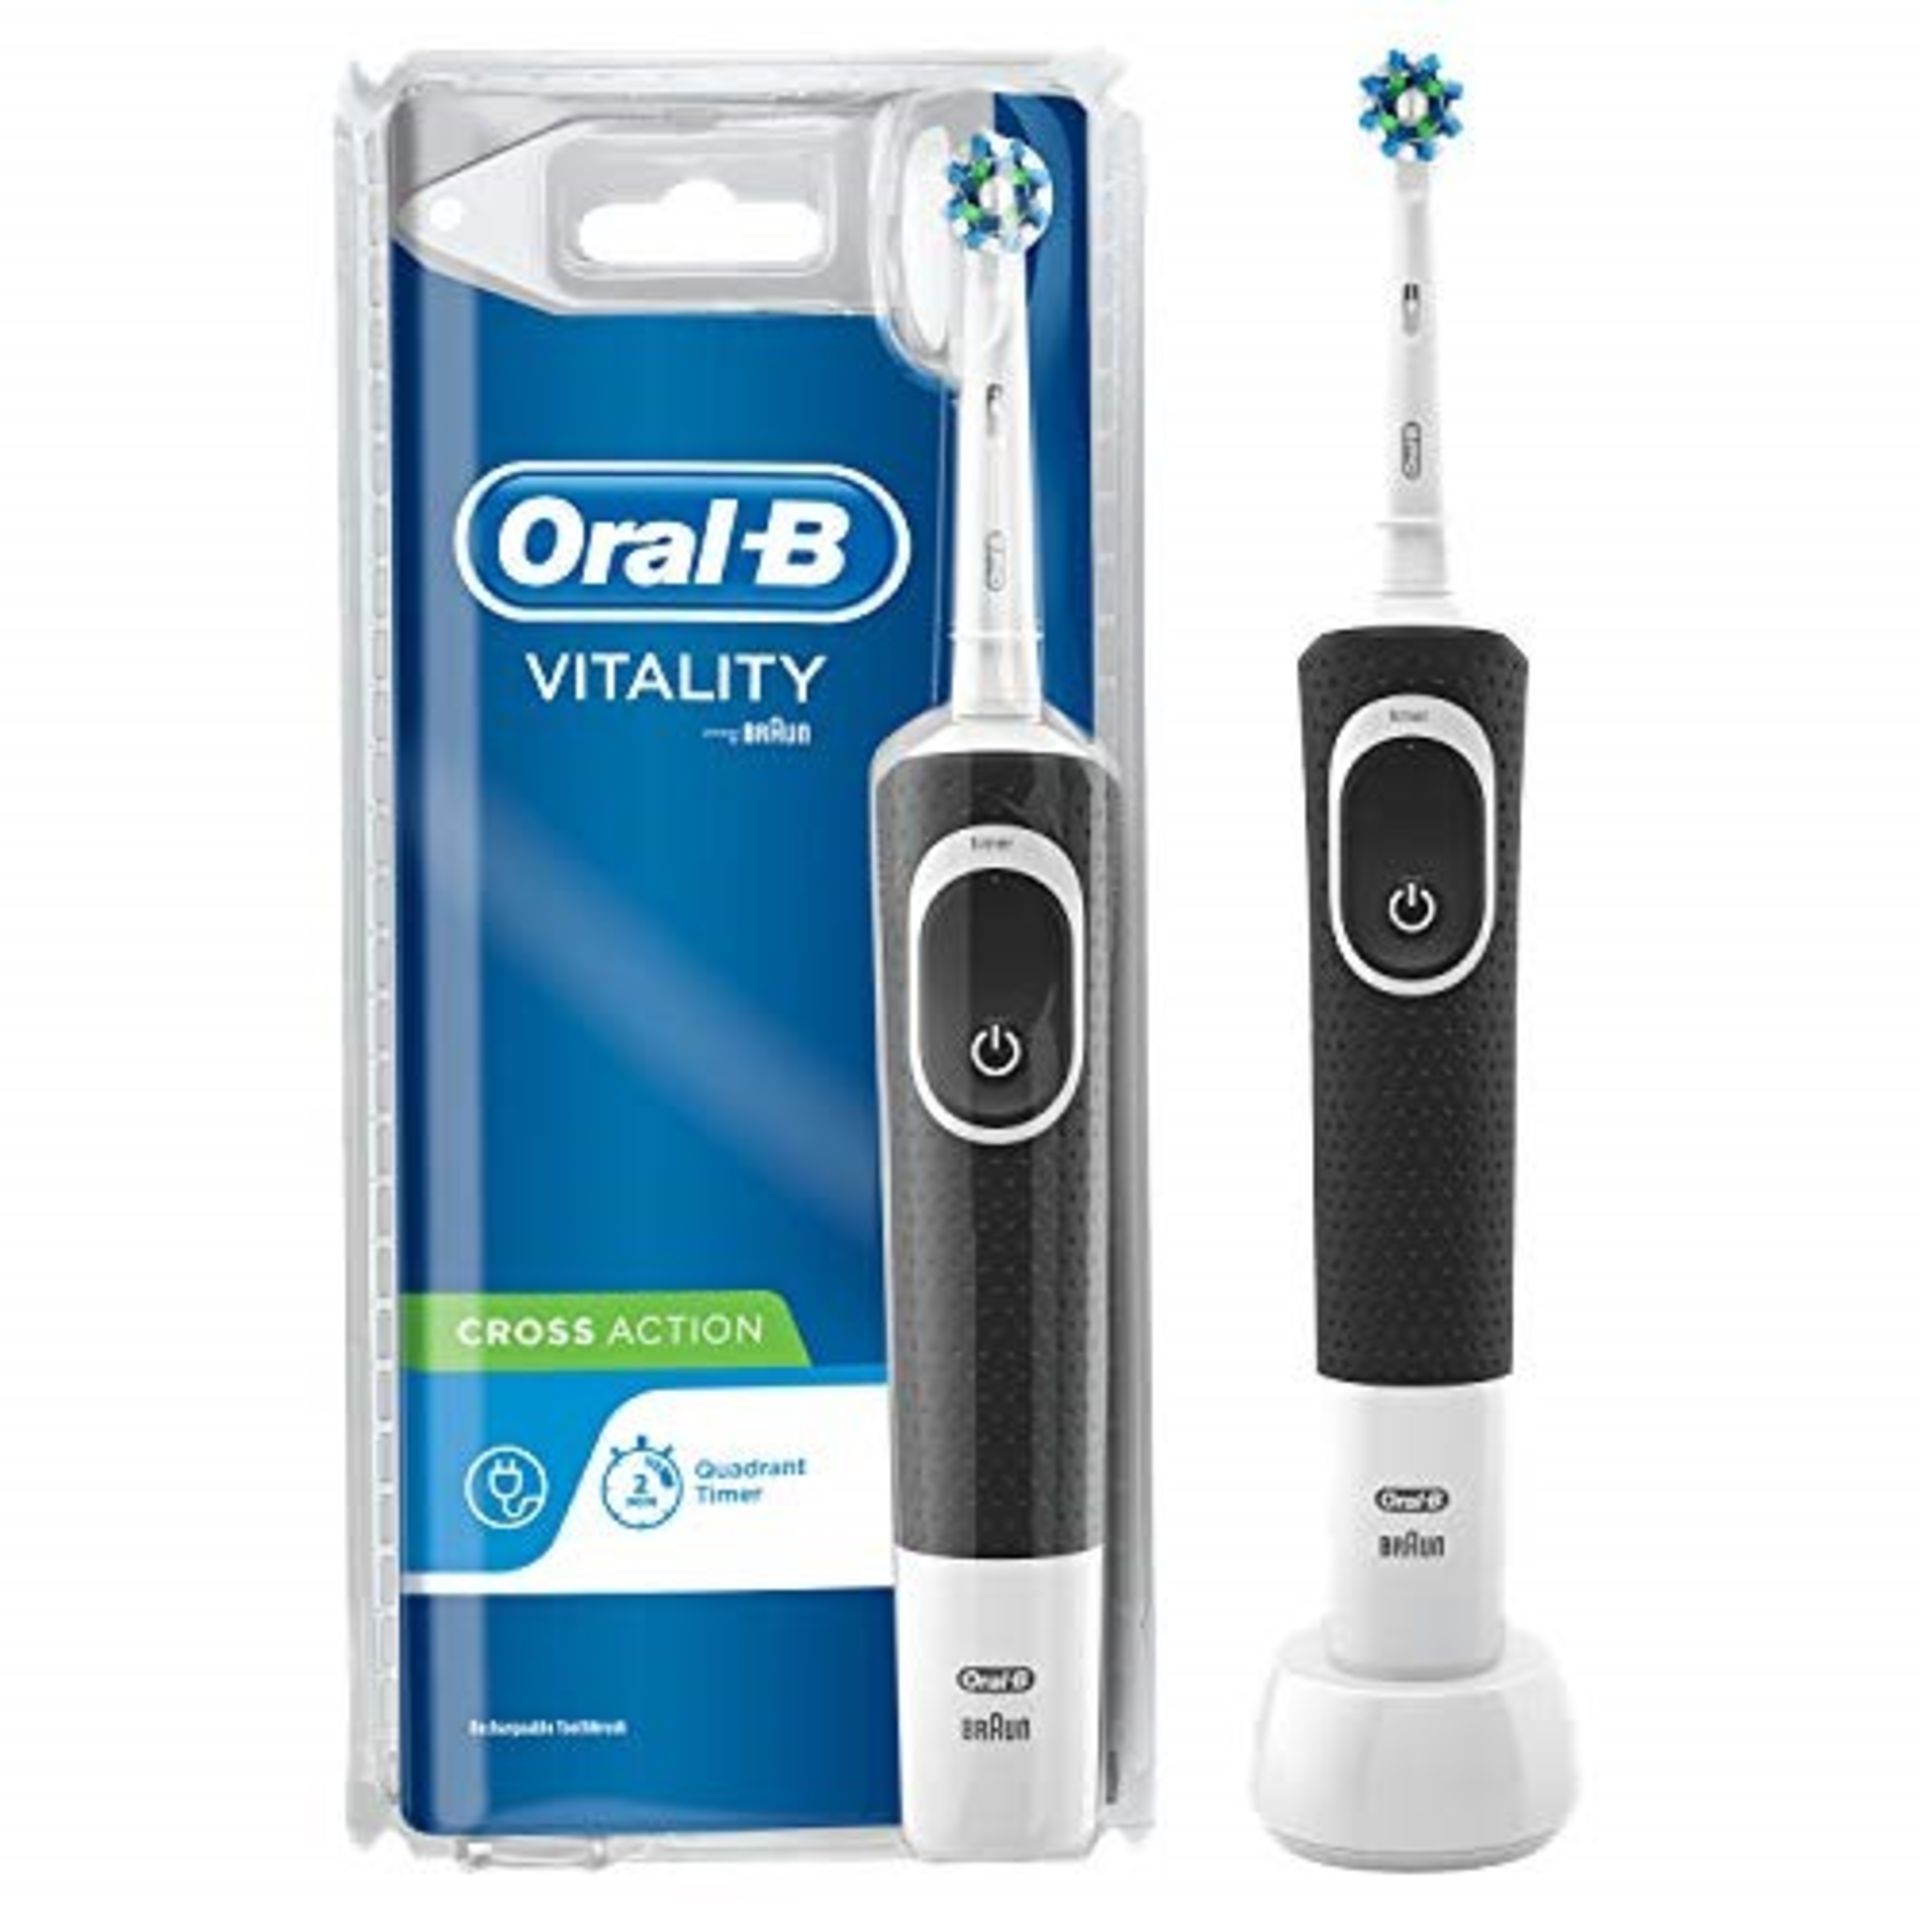 Oral-B Vitality CrossAction Rechargeable Toothbr